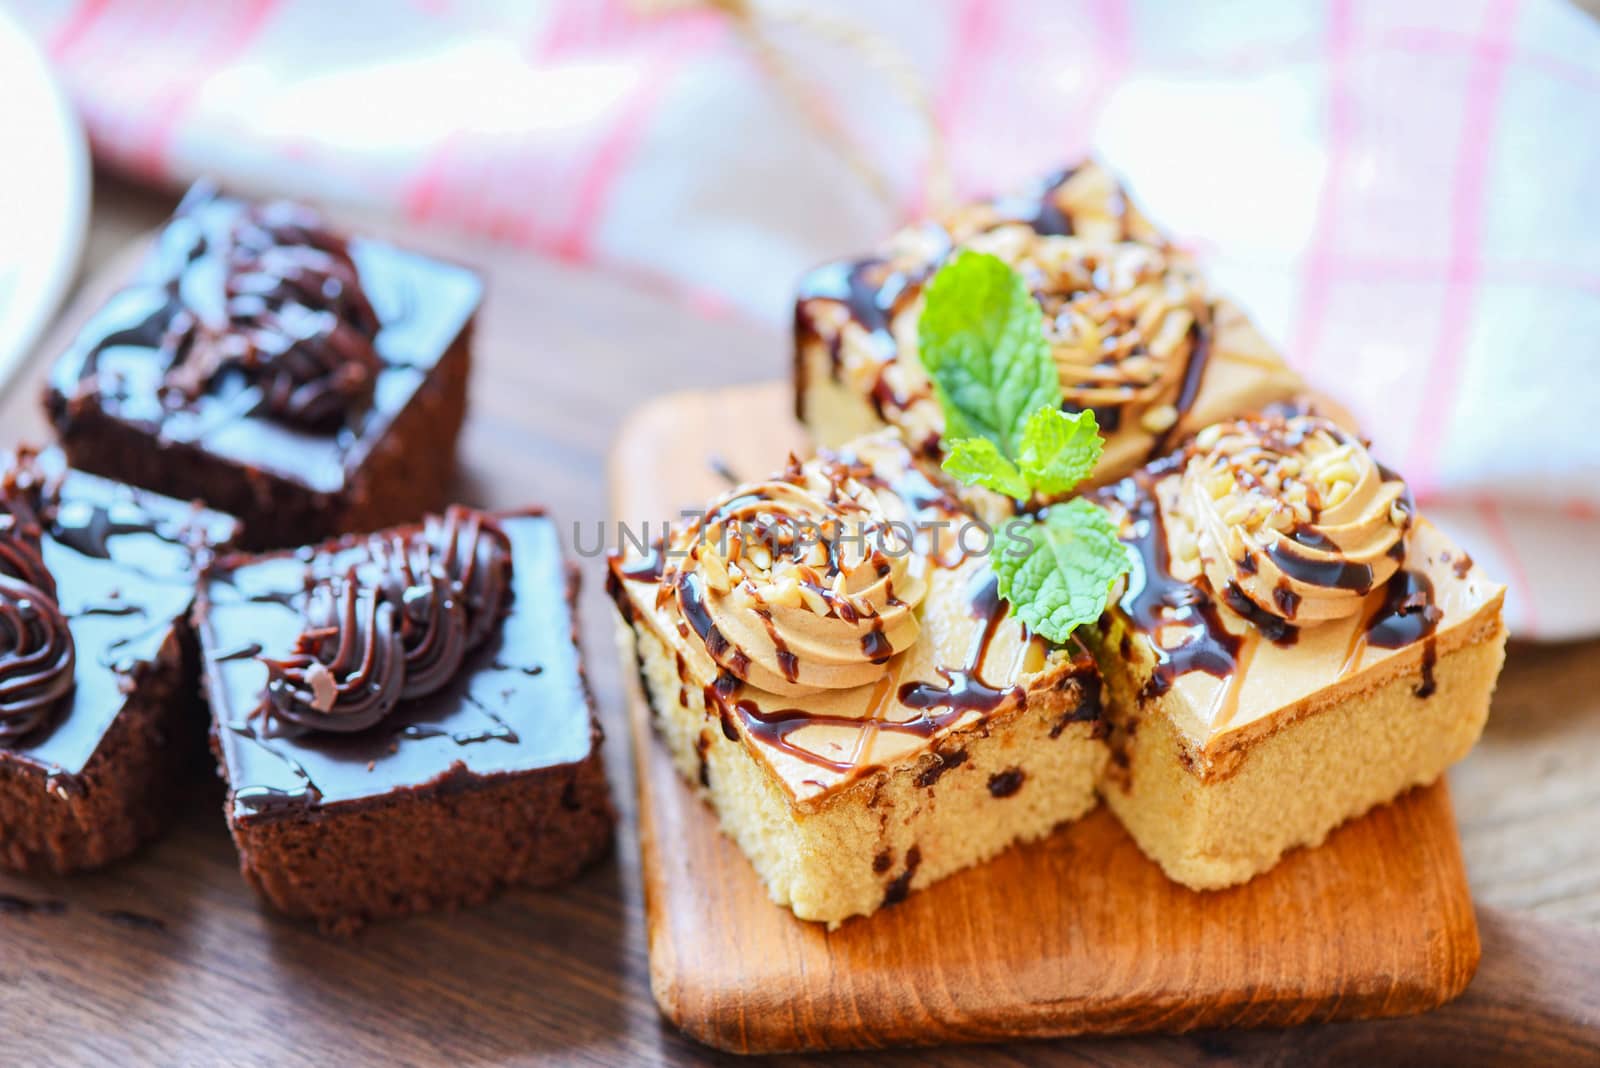 Coffee cake topping chocolate delicious sweet dessert served on the table / cake chocolate slice on wooden with mint leaf for breakfast